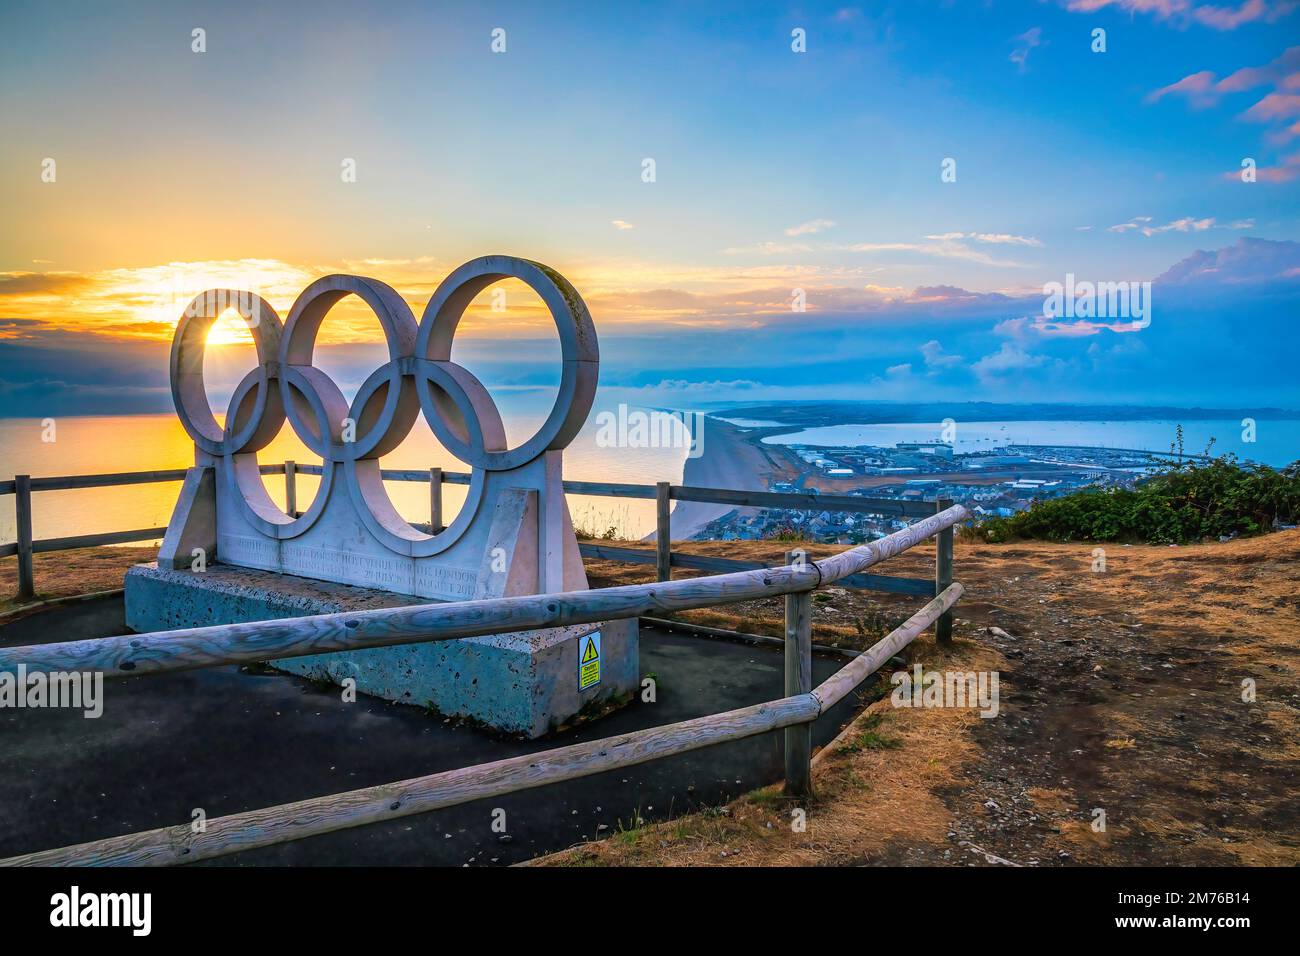 Olympic Rings stone sculpture on Isle of Portland overlooking Weymouth, Chesil Beach Stock Photo